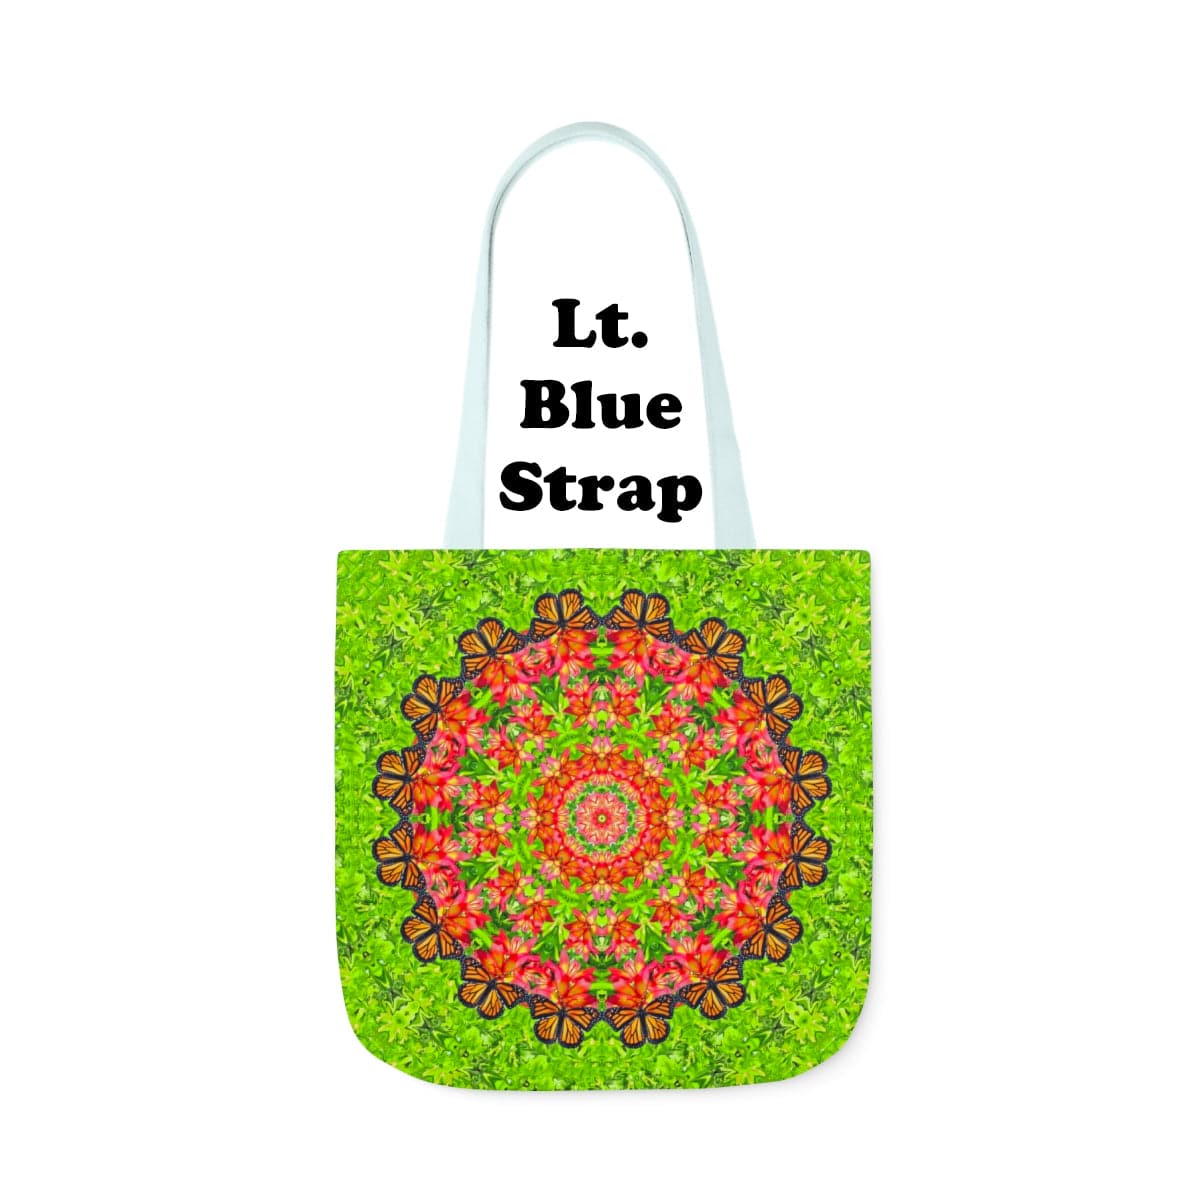 Graphic Butterfly Tote Bag  Cute and Functional For Everyday, Work And Shopping Captivating Calliope lt. blue strap